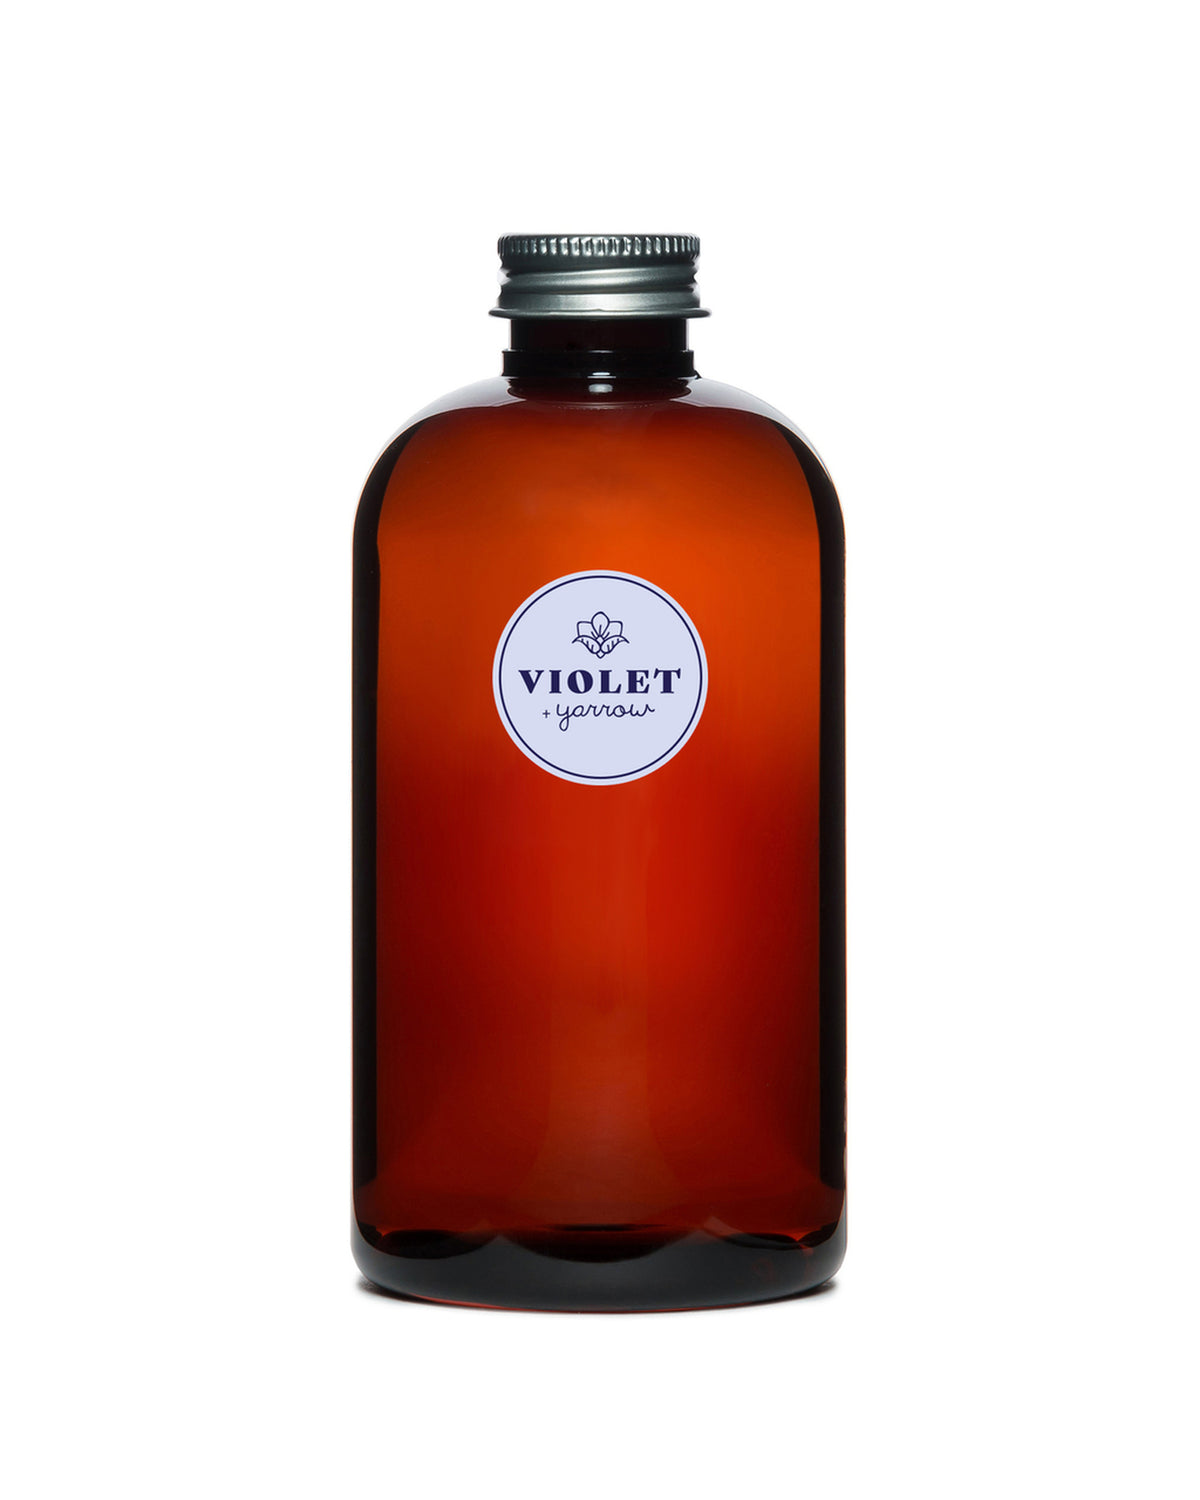 U.S. Apothecary Violet + Yarrow Diffuser Oil Refill